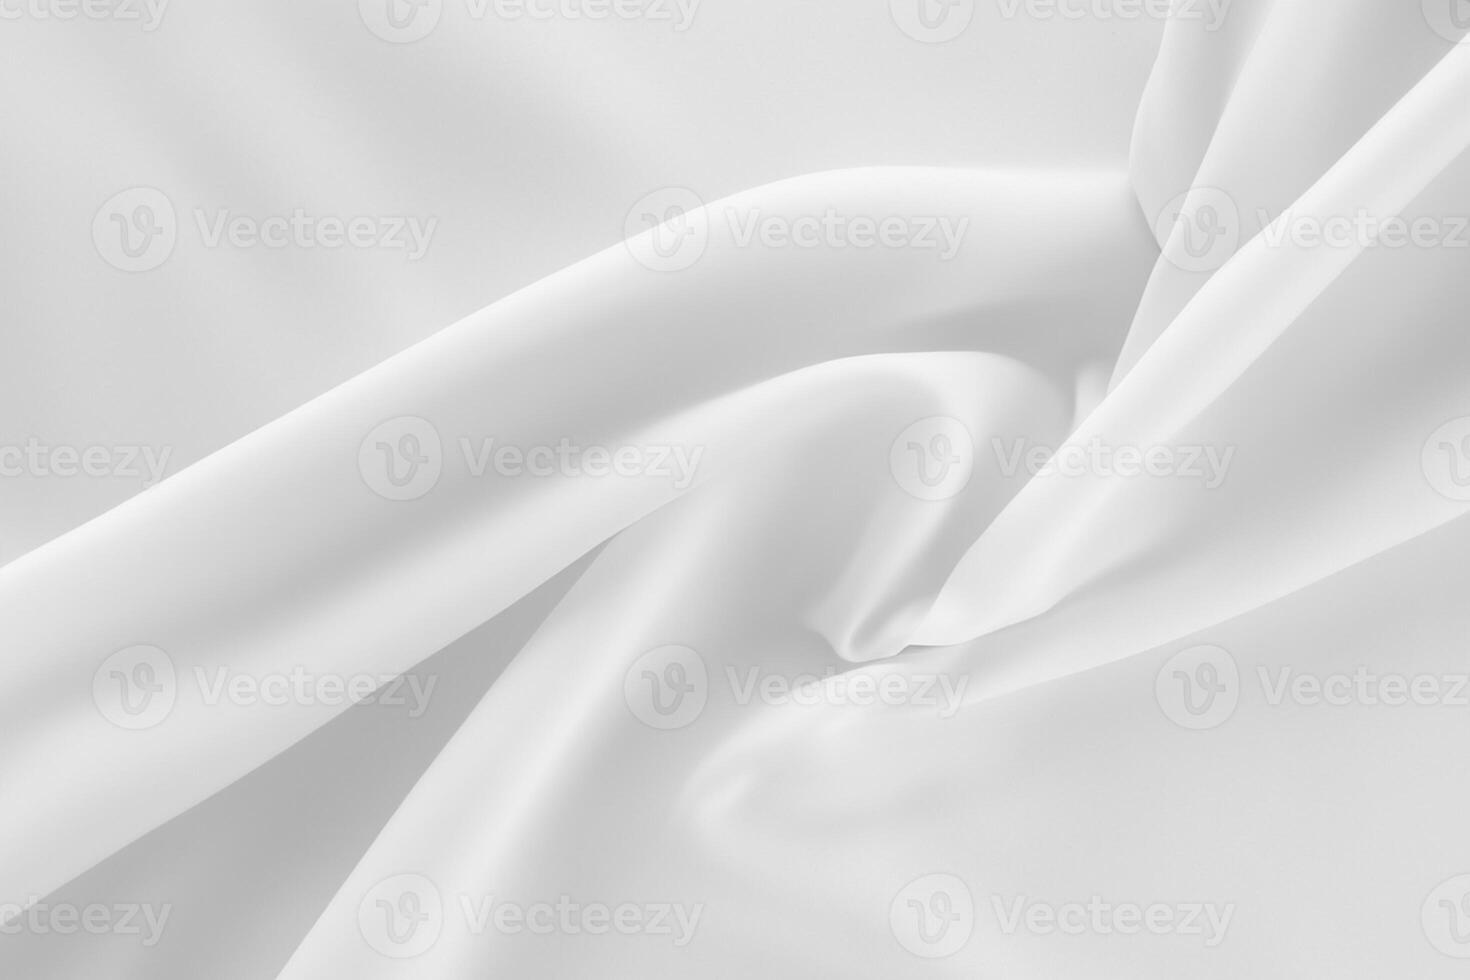 The Allure of Solid White Cloth Background, A Classic Canvas of Purity and Simplicity photo